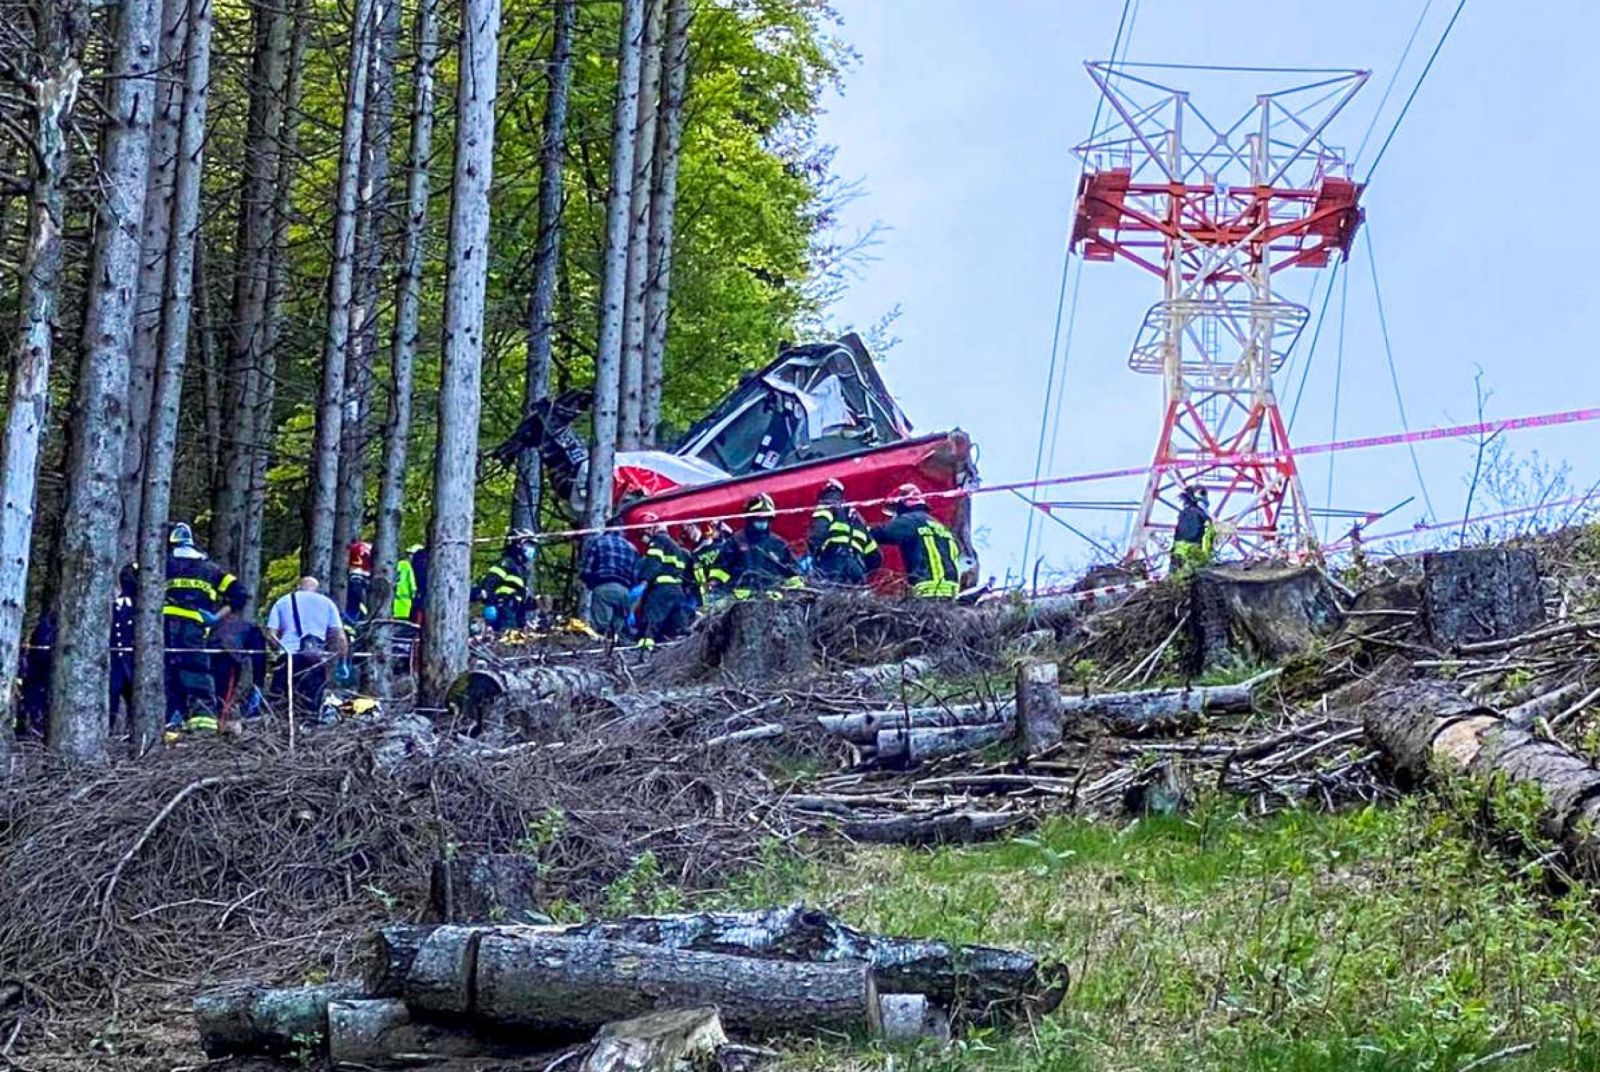 epa09223876 A handout photo made available by Italian Fire and Rescue Service shows Rescuers at work at the area of the cable car accident, near Lake Maggiore, northern Italy, 23 May 2021. The cable car that connects Stresa with Mottarone has crashed, claiming 14 lives, according to the latest toll. The accident has been caused by the failure of a rope, in the highest part of the route which, starting from Lake Maggiore reaches an altitude of 1,491 meters.  EPA/ITALIAN FIRE AND RESCUE SERVICE / HANDOUT  HANDOUT EDITORIAL USE ONLY/NO SALES